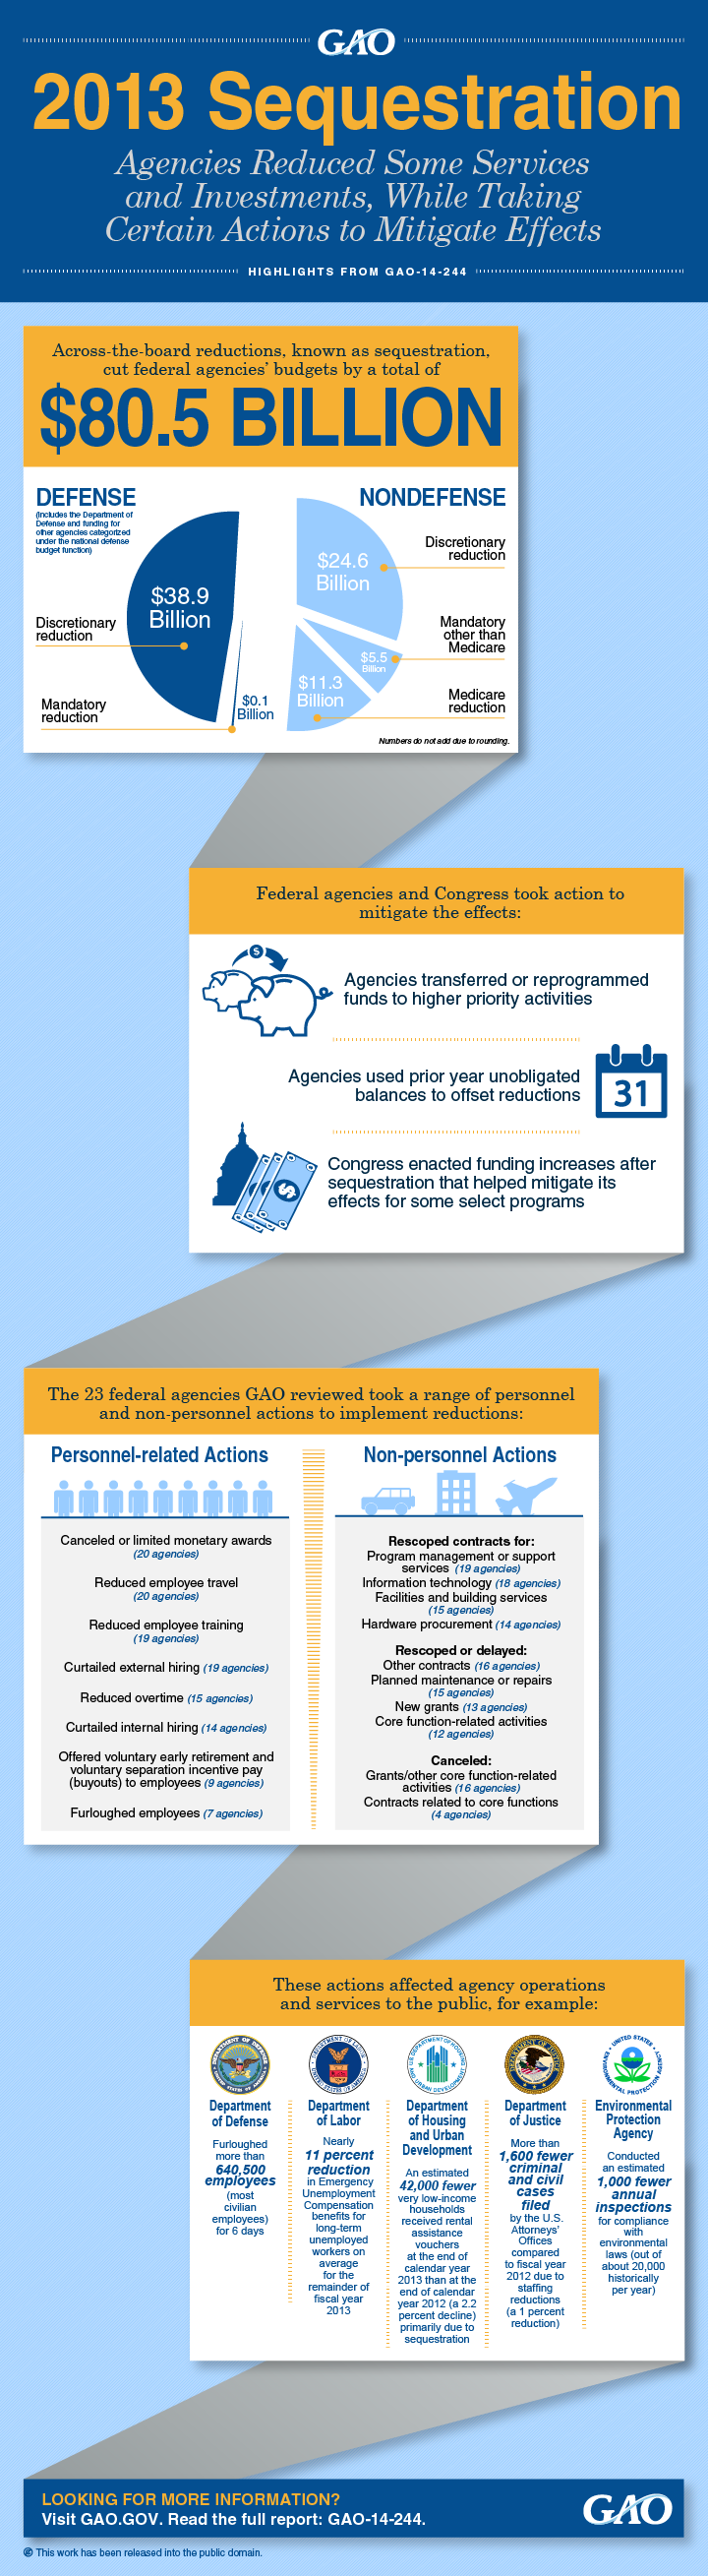 Sequestration Infographic full size